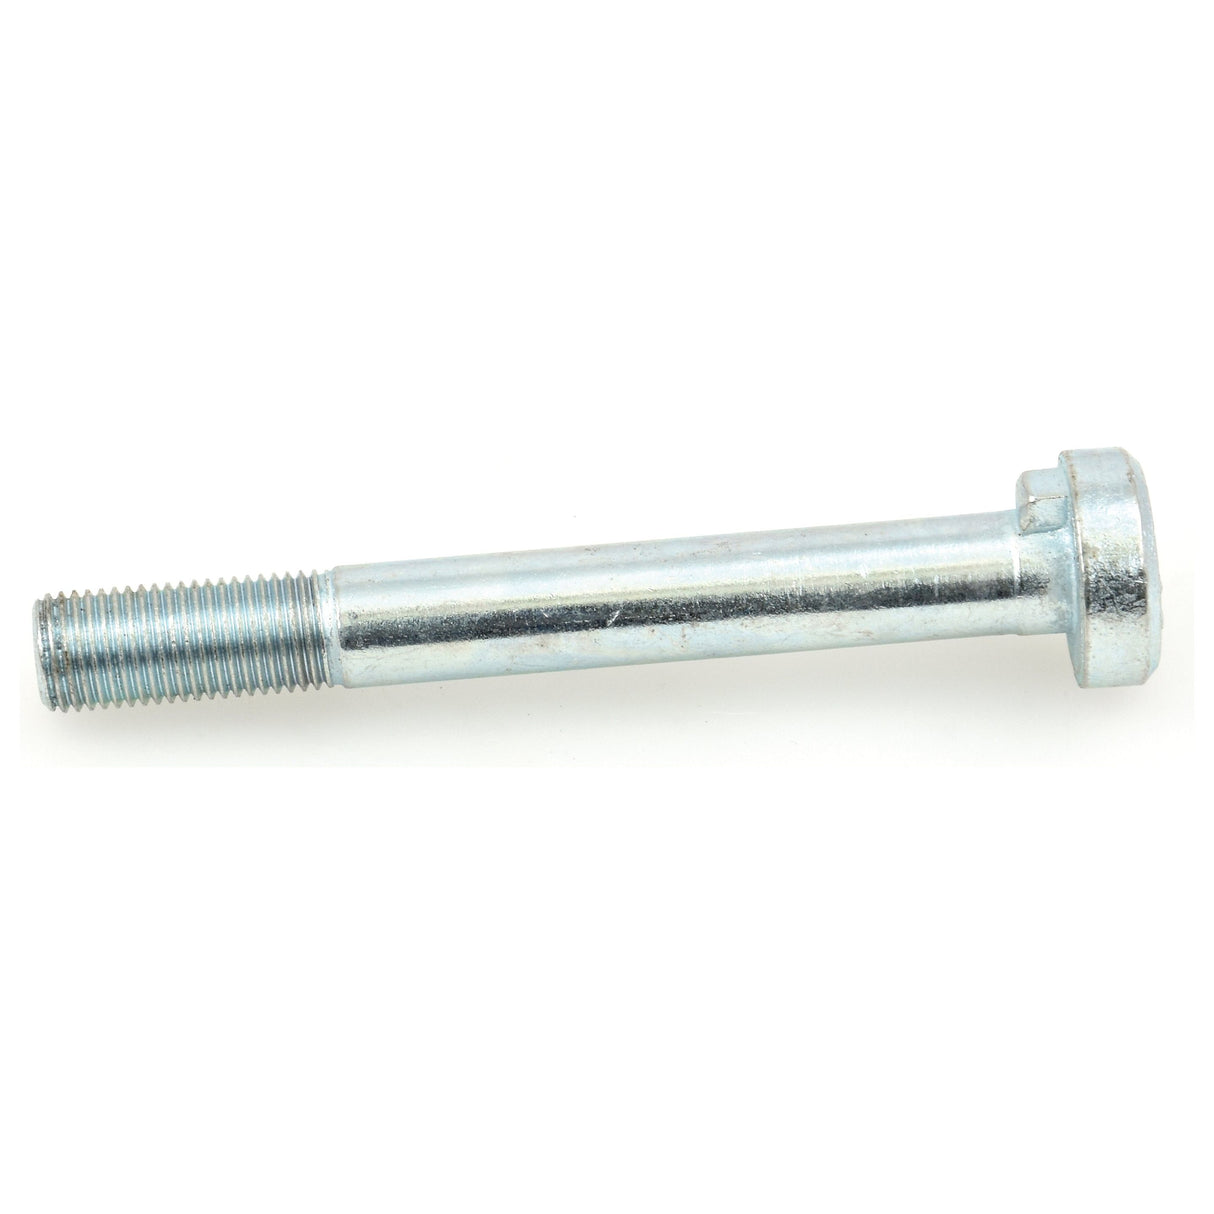 Pipped Wheel Bolt M14 x 1.5 x 110mm ( )
 - S.8397 - Massey Tractor Parts